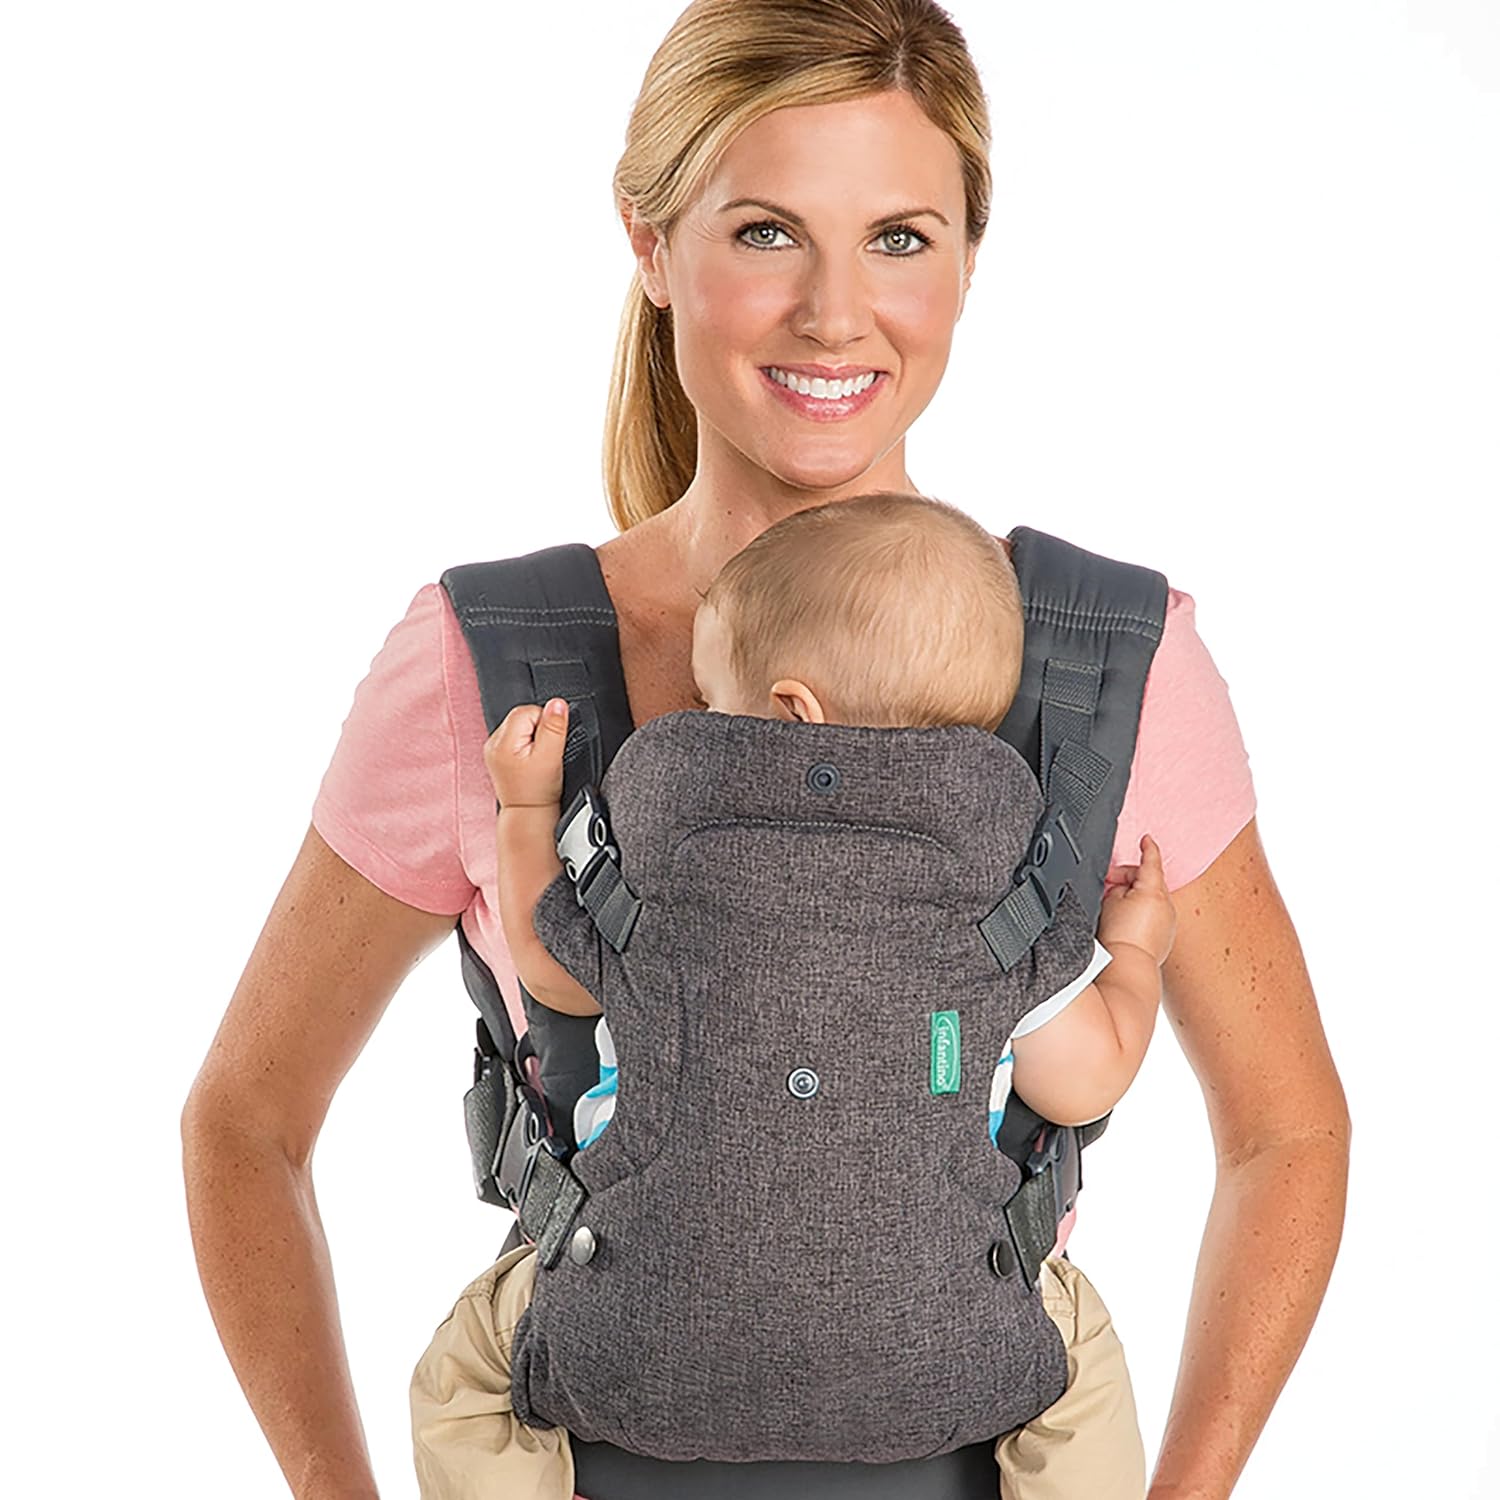 Best Baby Carrier: Top Picks for Comfortable and Convenient Babywearing